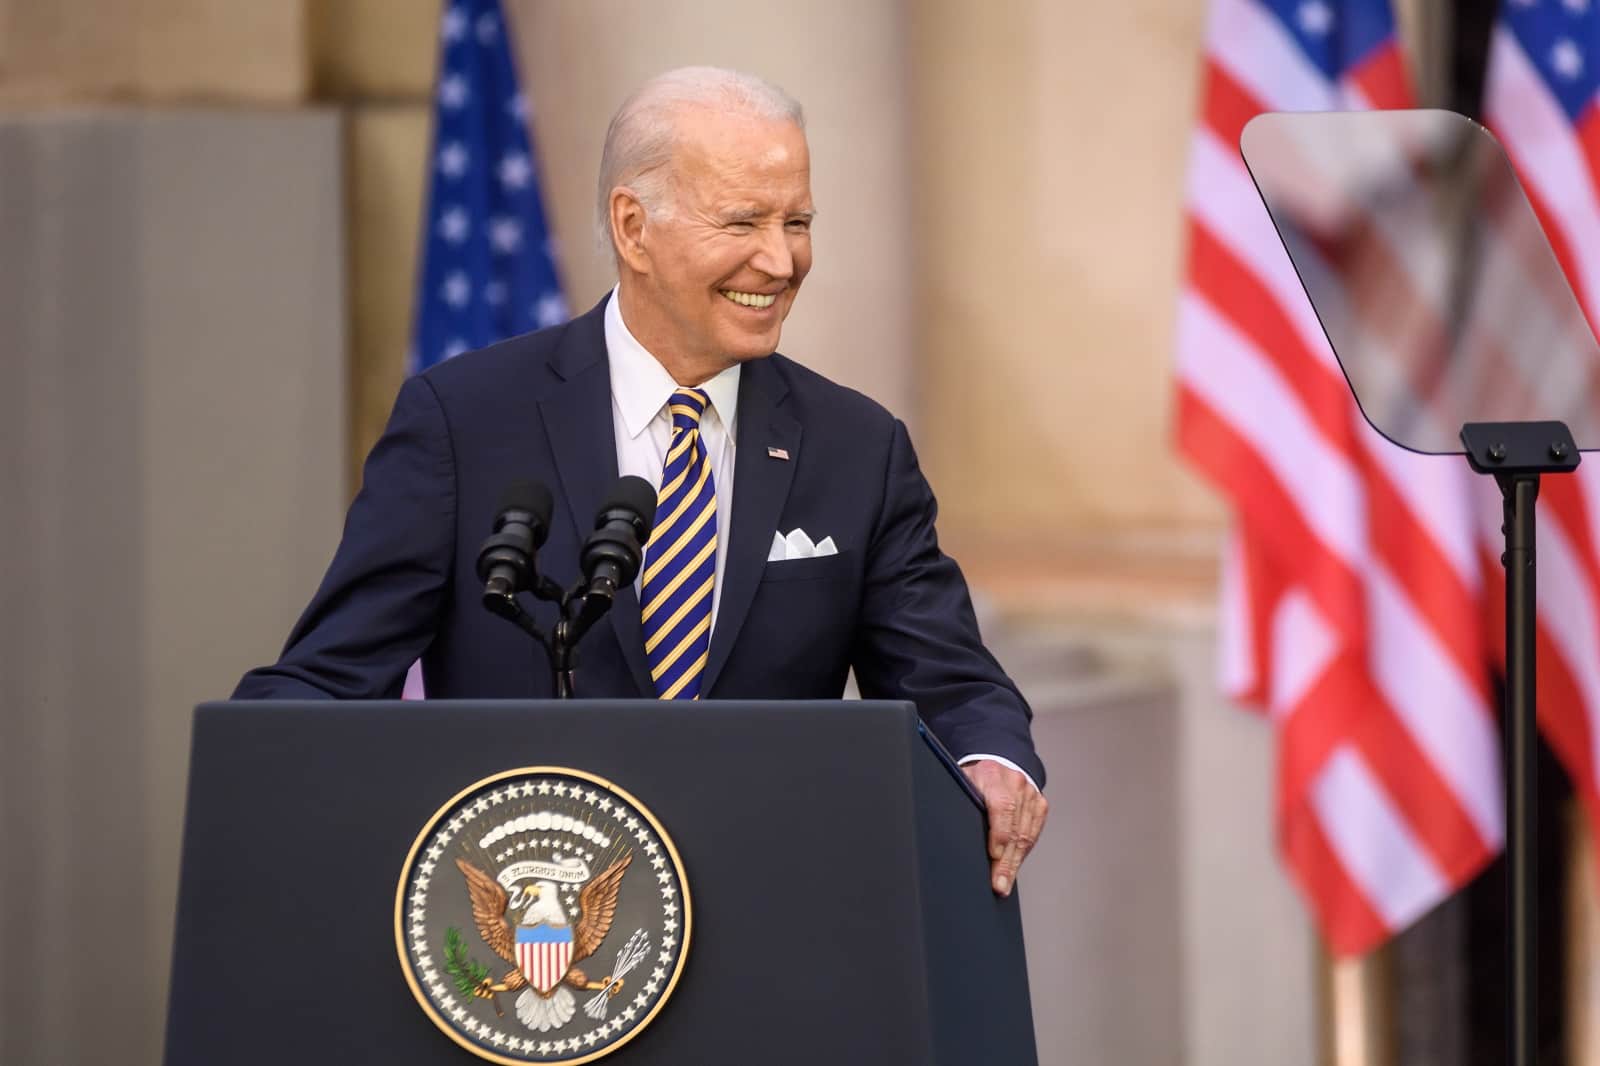 <p><span>The judge’s ruling represents a significant victory for the Biden administration, which has been actively working to prevent further consolidation in the U.S. airline industry. The decision could set a precedent, affecting other potential mergers in the sector, such as the proposed acquisition of Hawaiian Airlines by Alaska Air.</span></p>